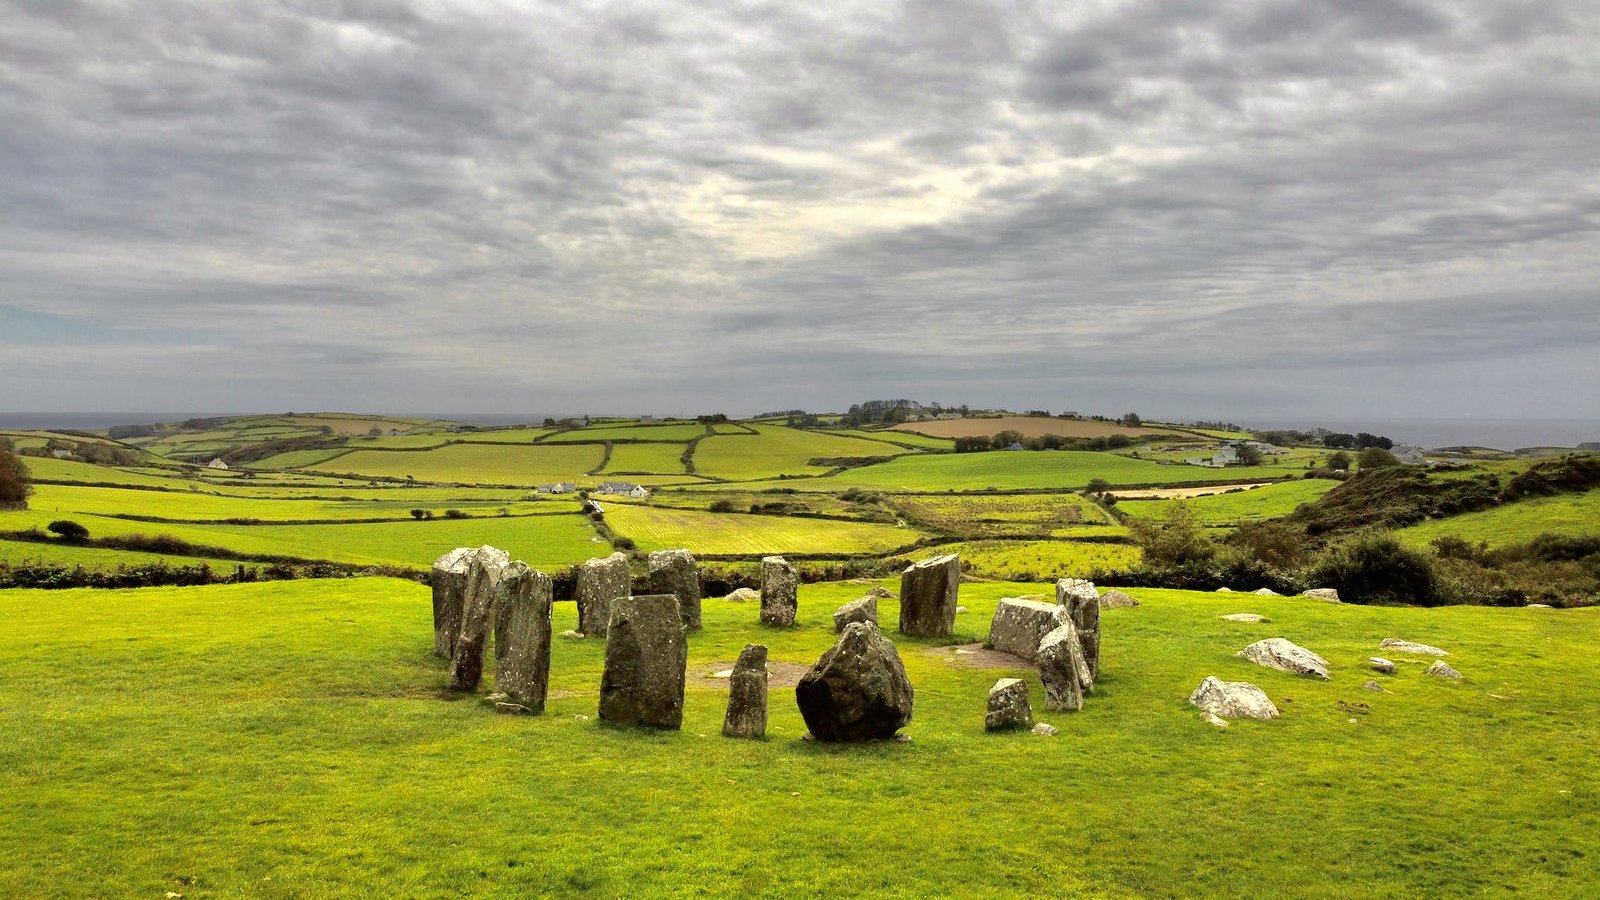 An ancient stone circle on a field of green explains why Ireland is known as the Emerald Isle.